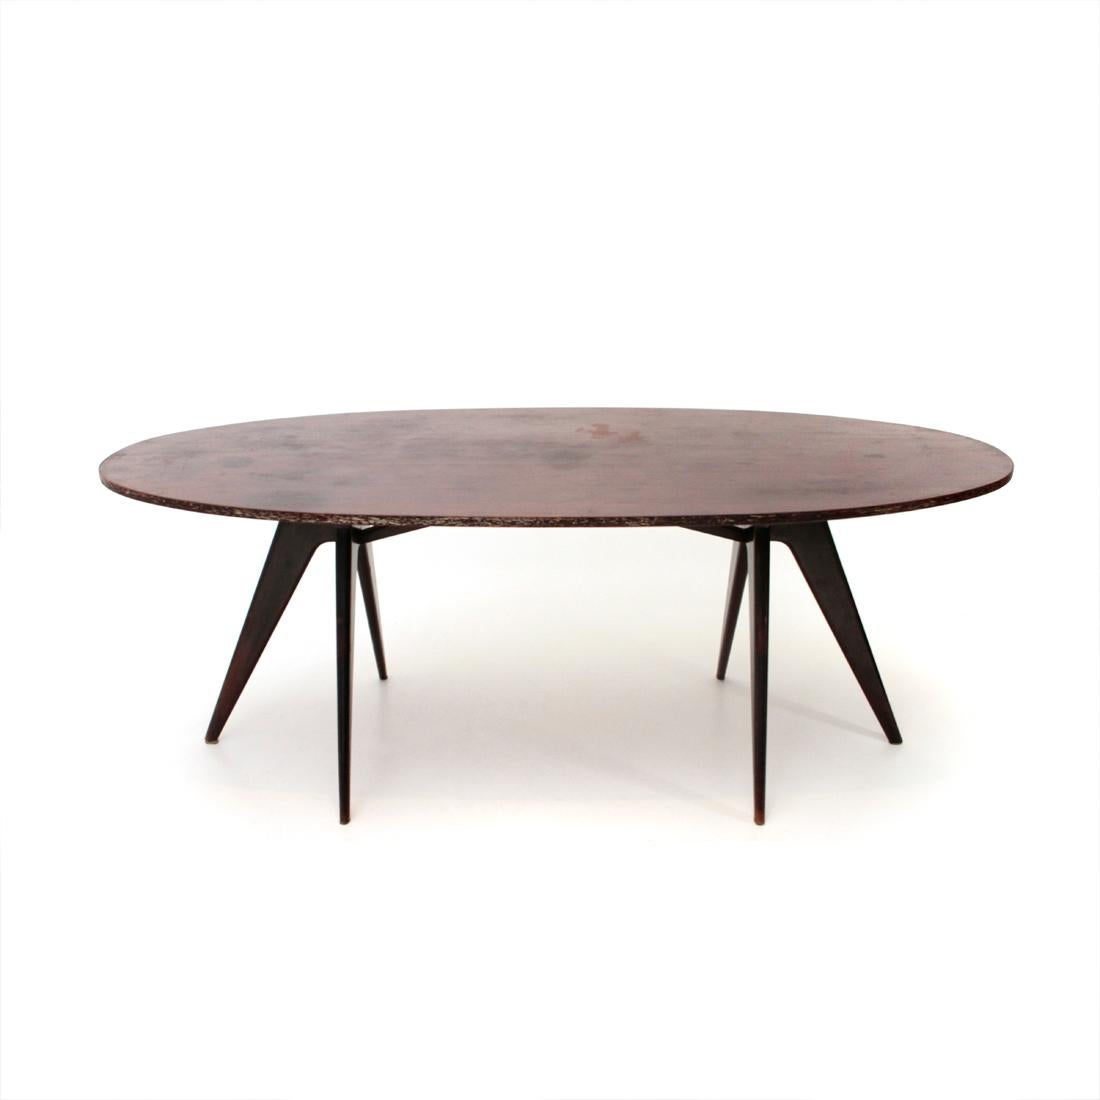 Italian Midcentury Dining Table with Oval Top, 1950s 1